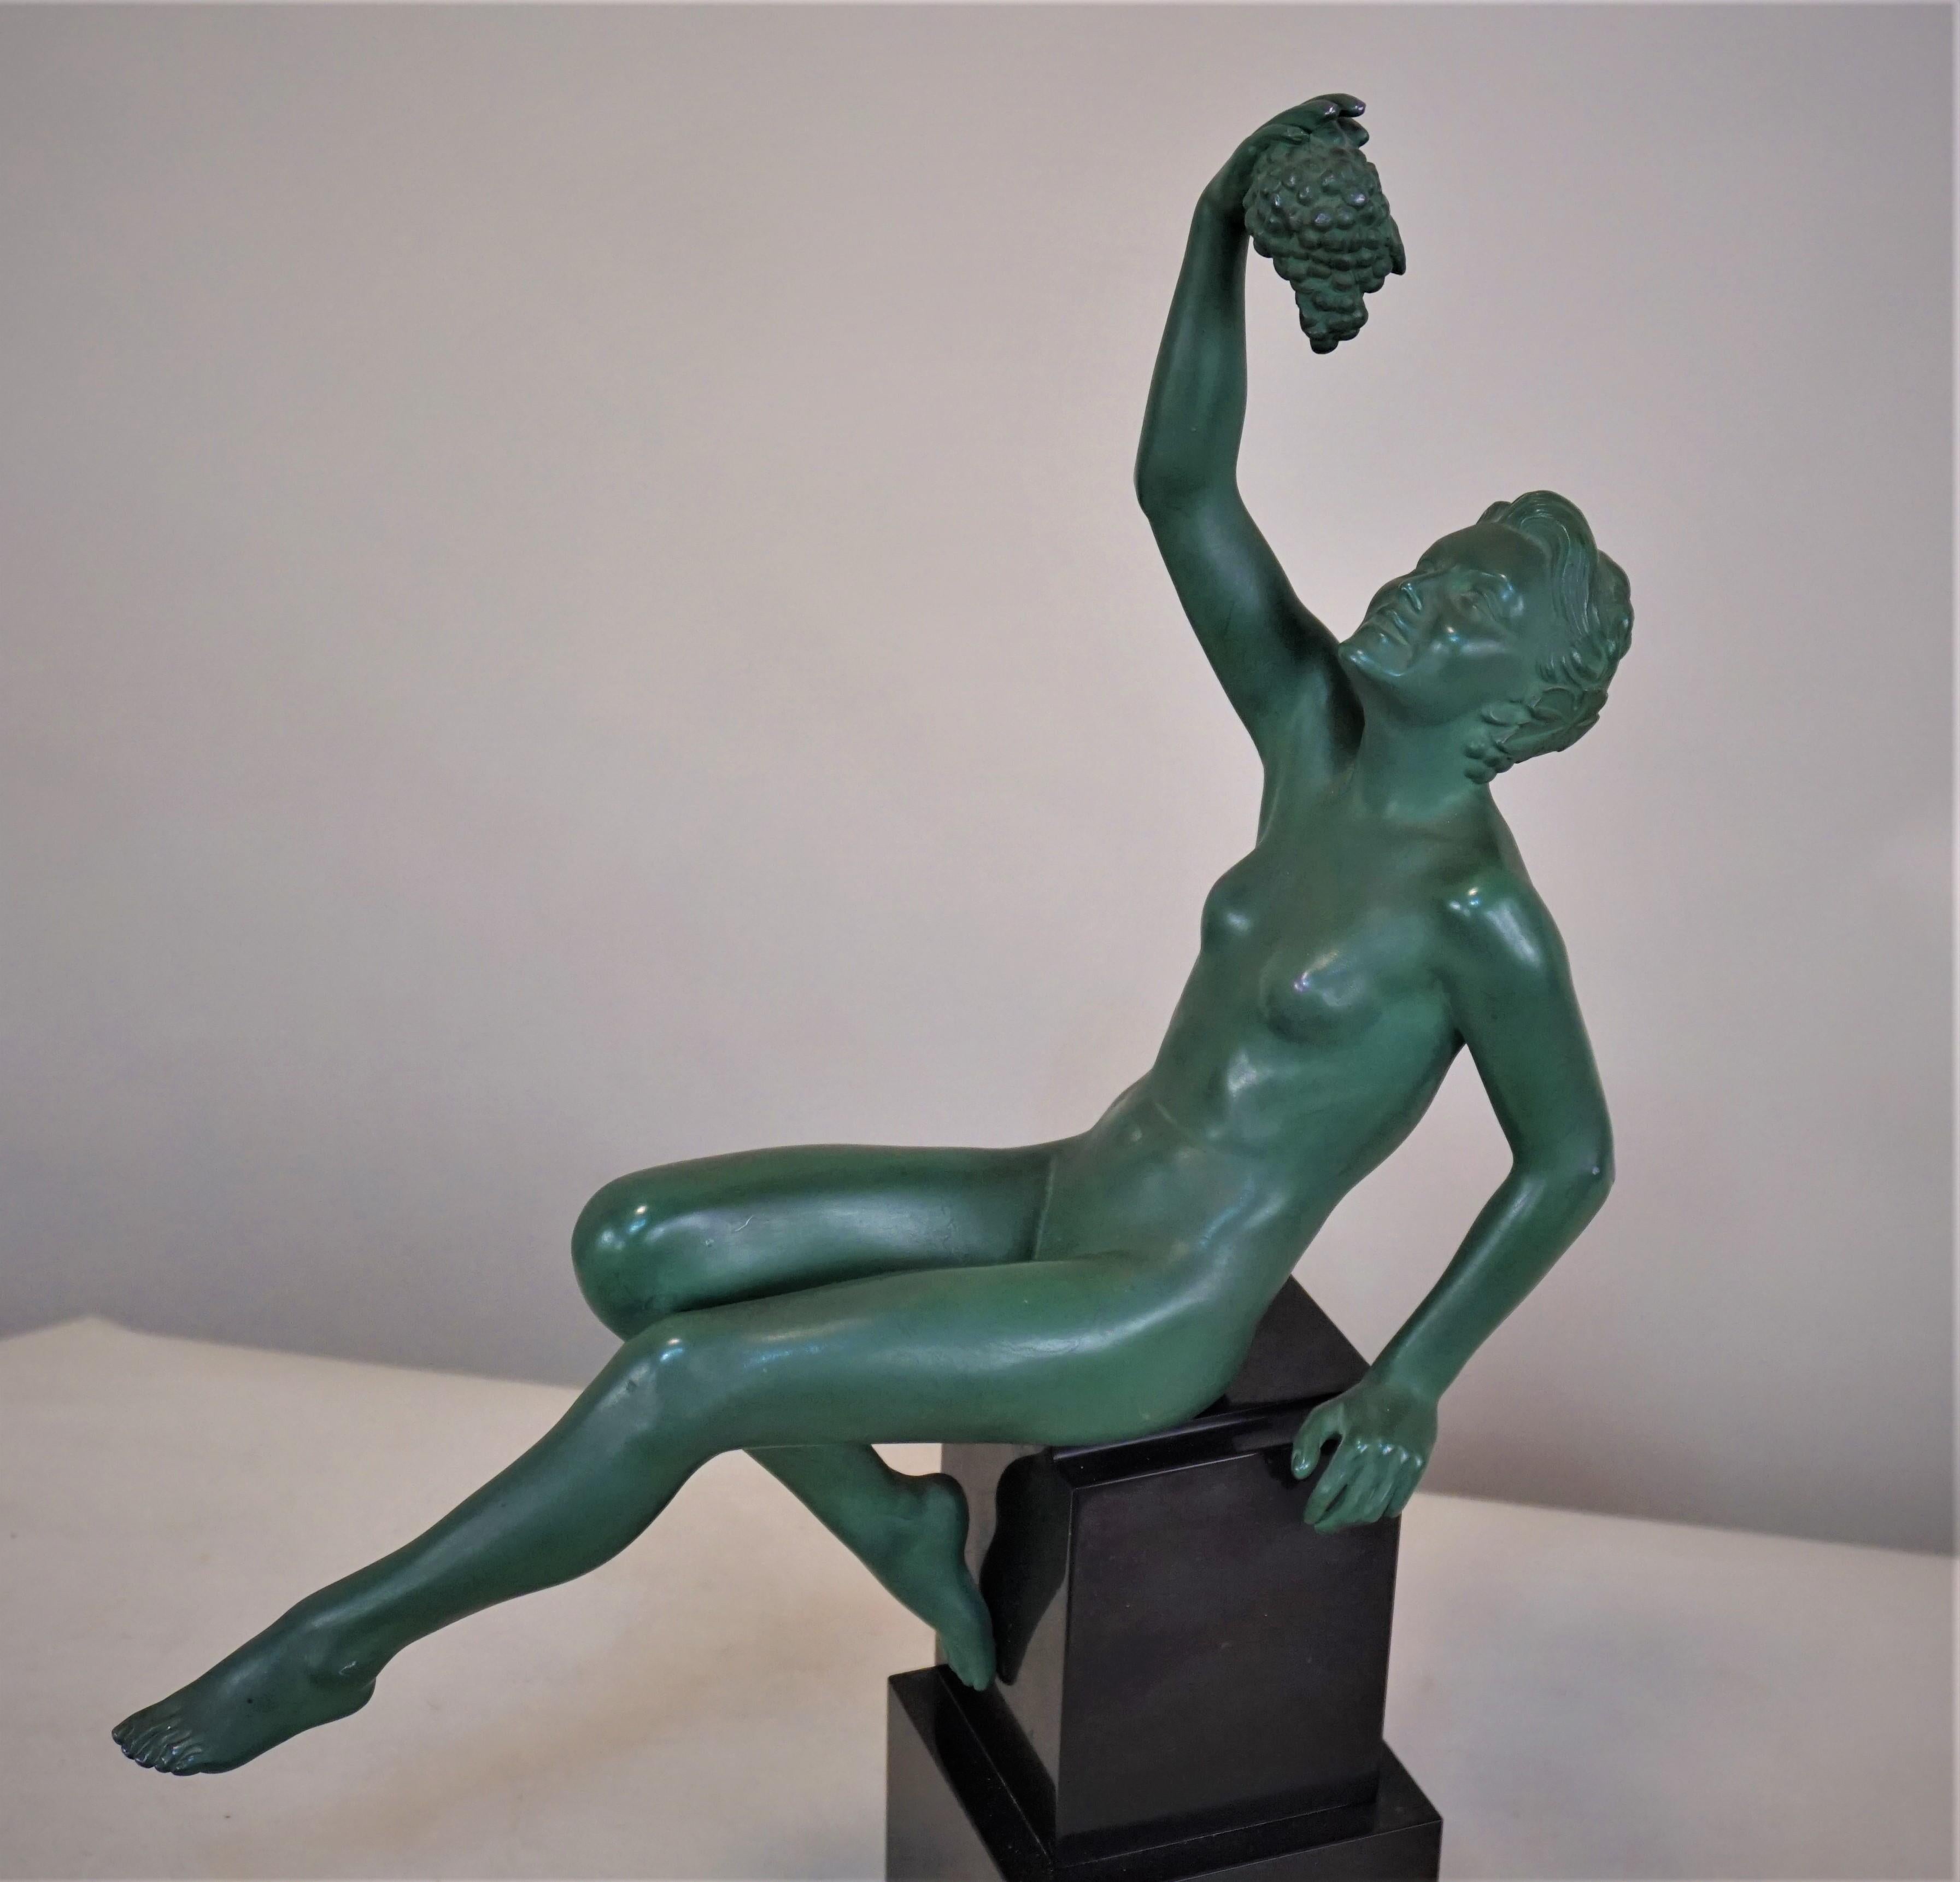 This elegant Art Deco sculpture was created by the iconic sculptor and designer Max Le Verrier in 1925. The elegantly poised nude female figure with grape.
The sculpture is larger than standard one that he has done.